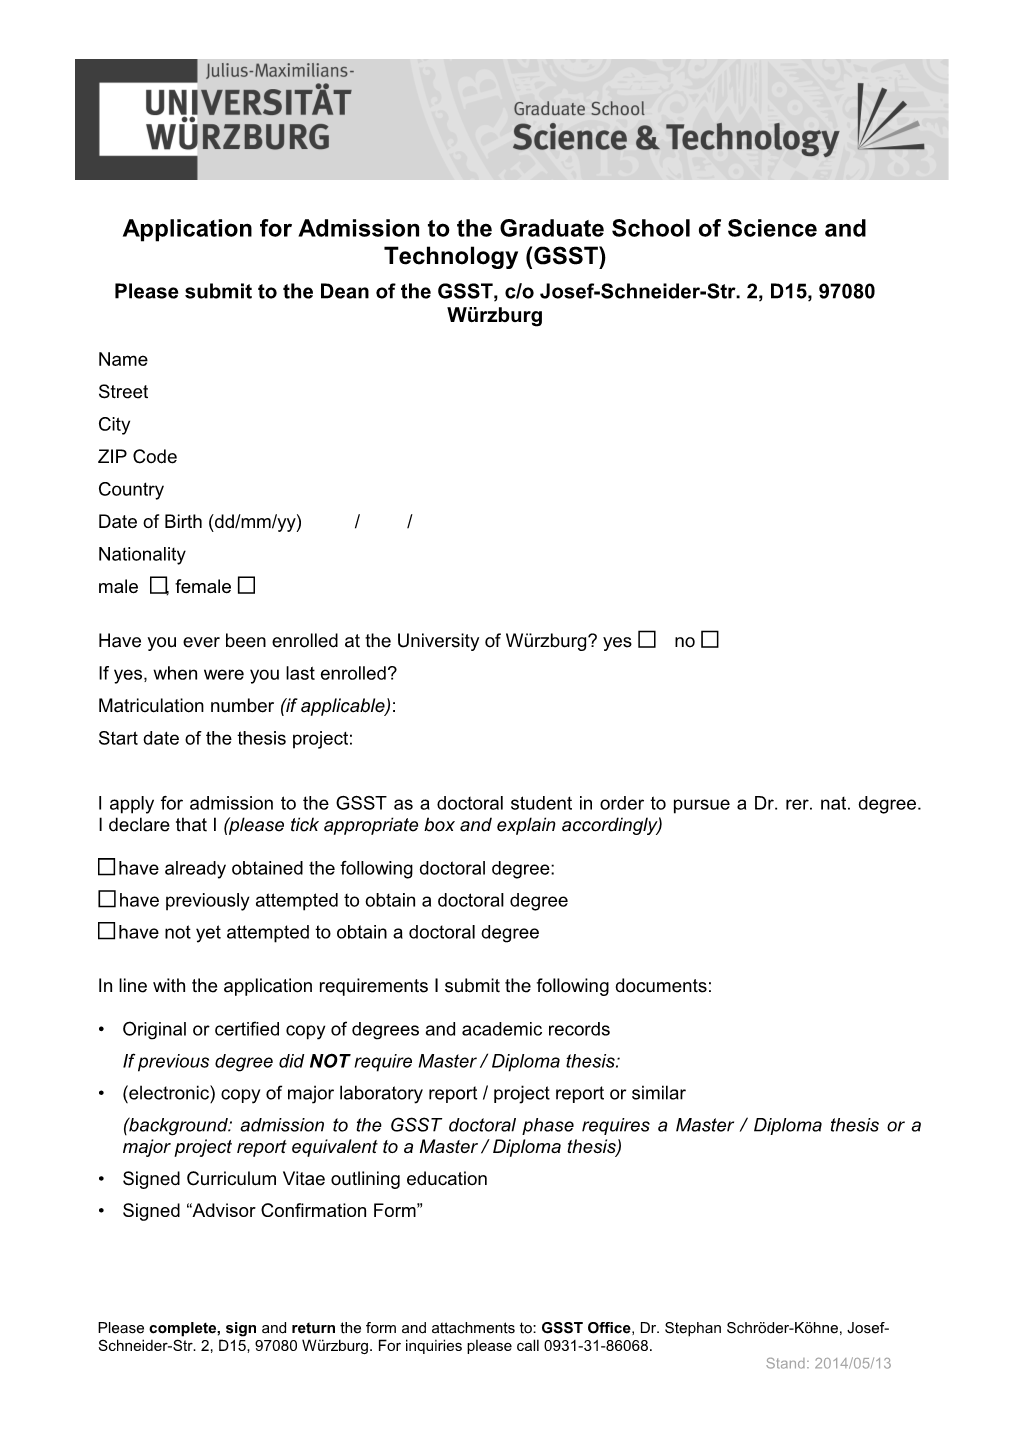 Application for Admission to the Graduate School of Science and Technology (GSST)